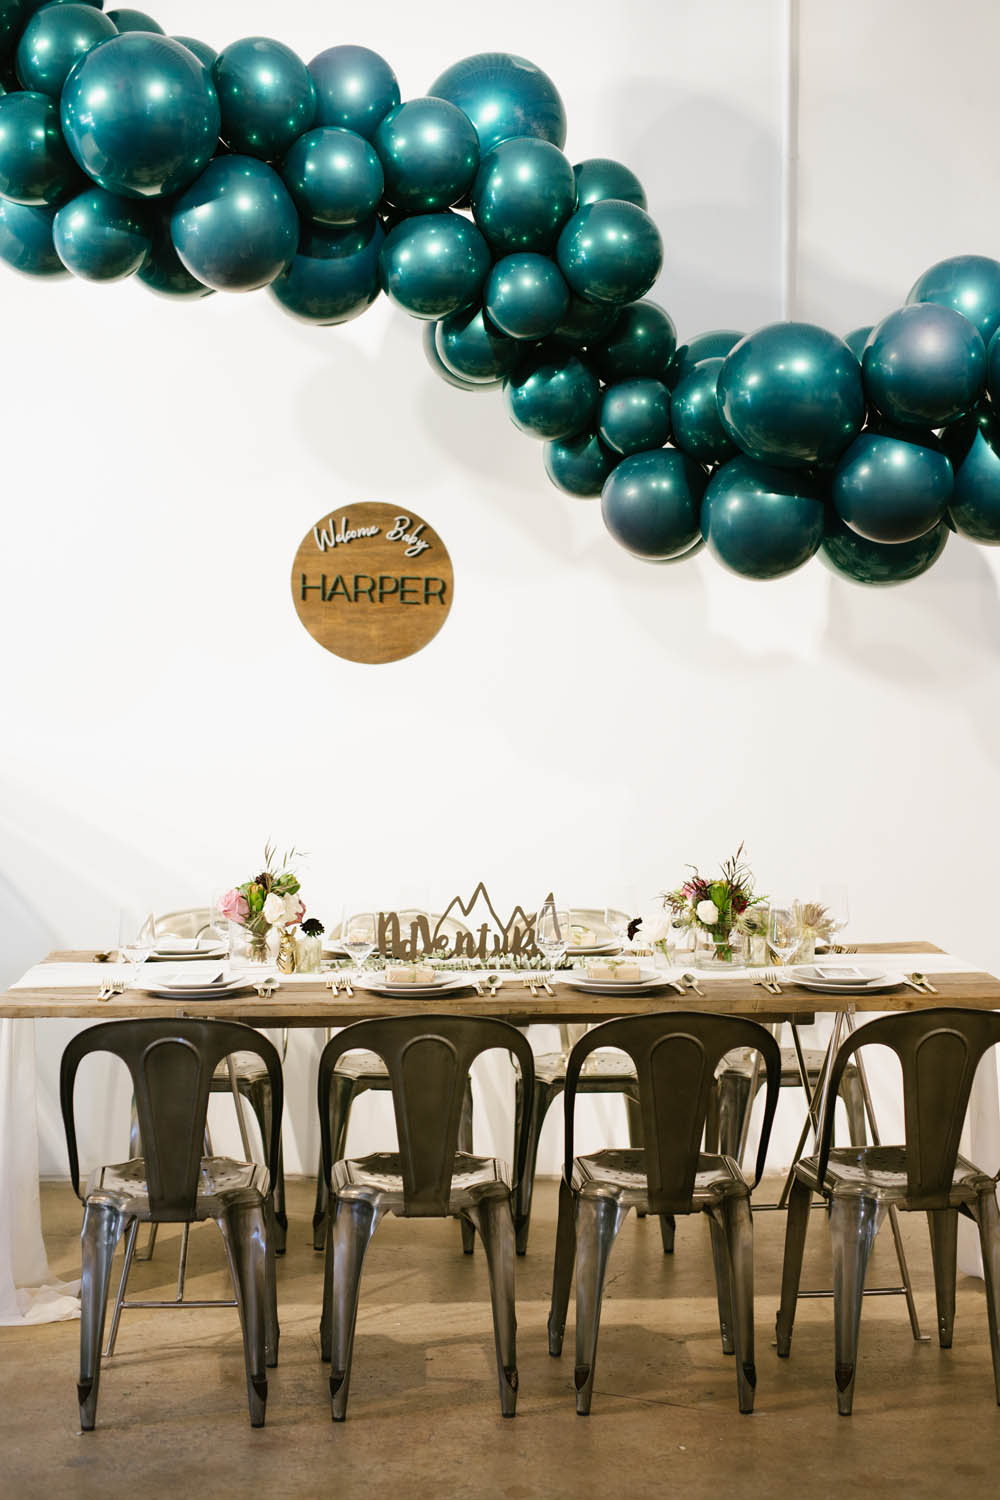 Baby shower ideas at Swaddle & Swoon